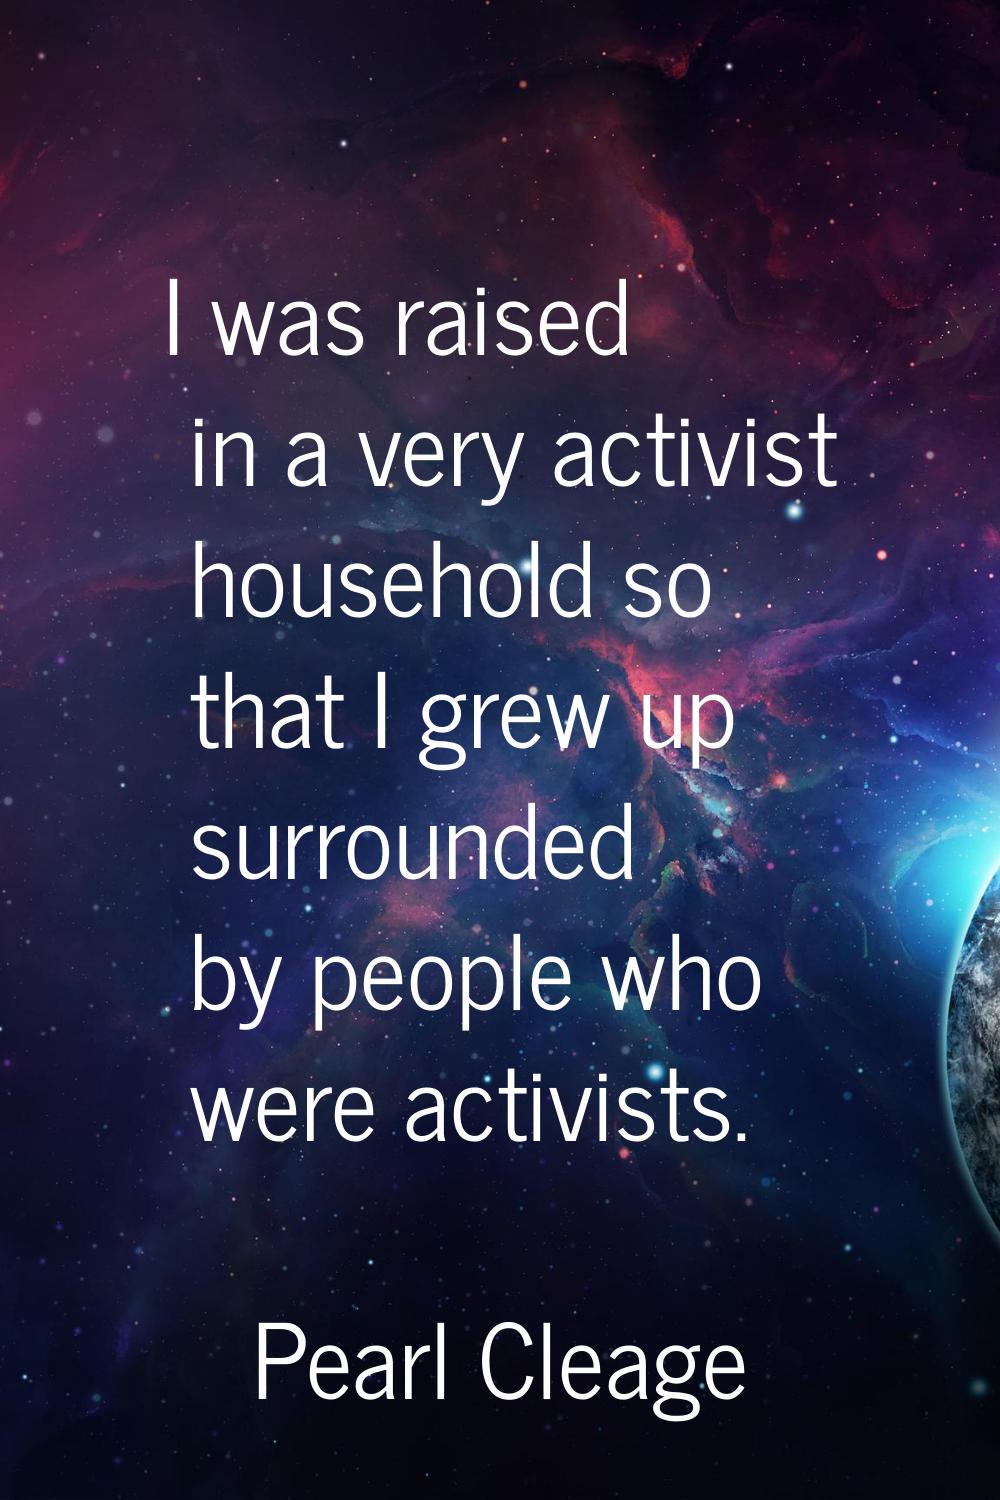 I was raised in a very activist household so that I grew up surrounded by people who were activists